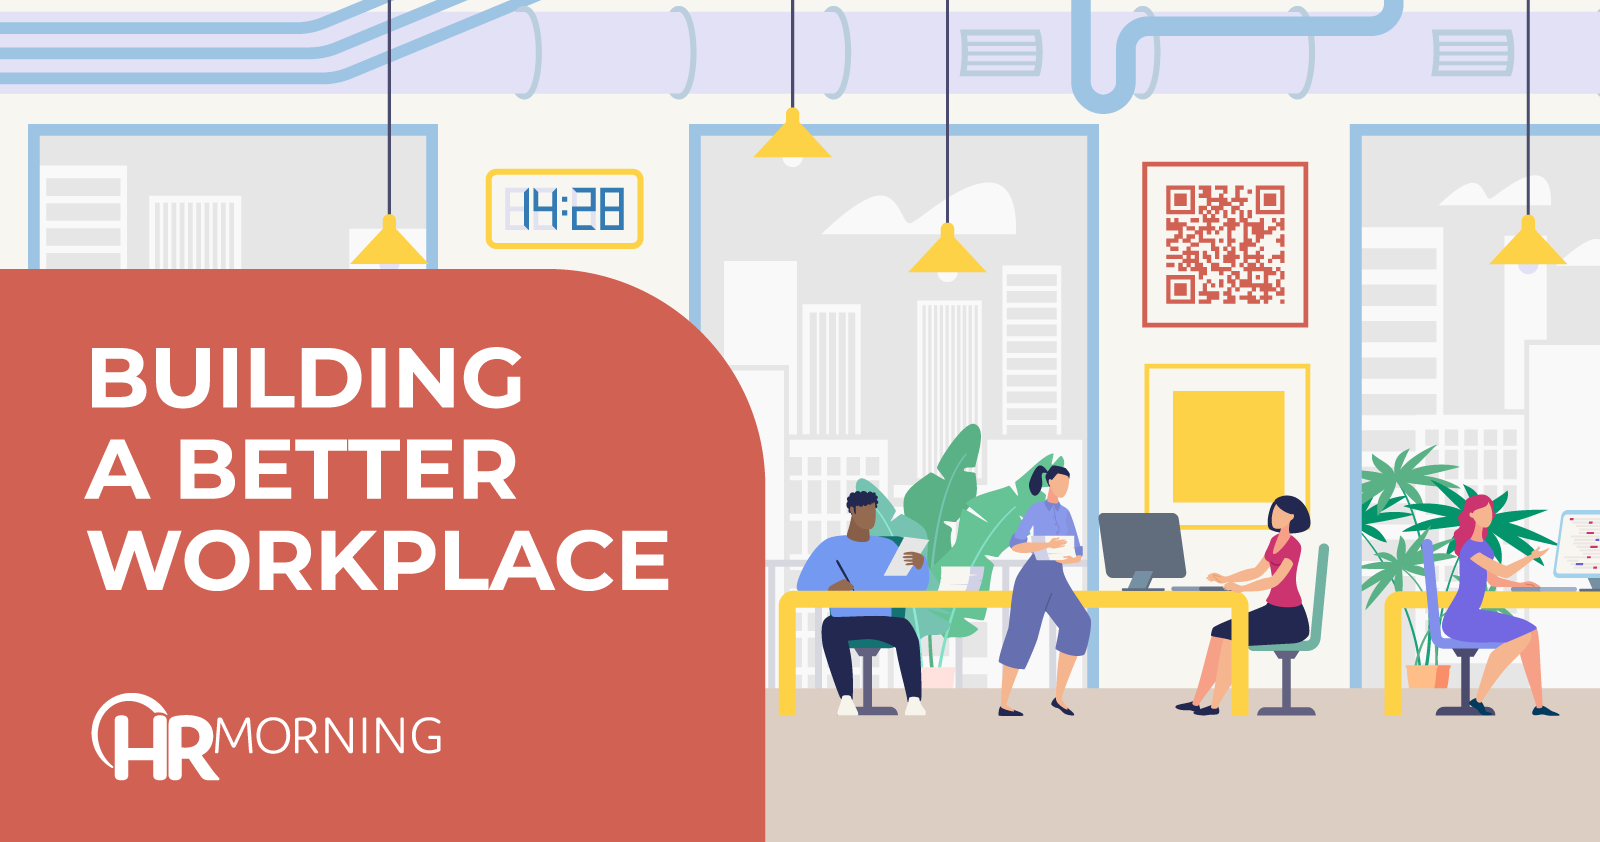 Building A Better Workplace